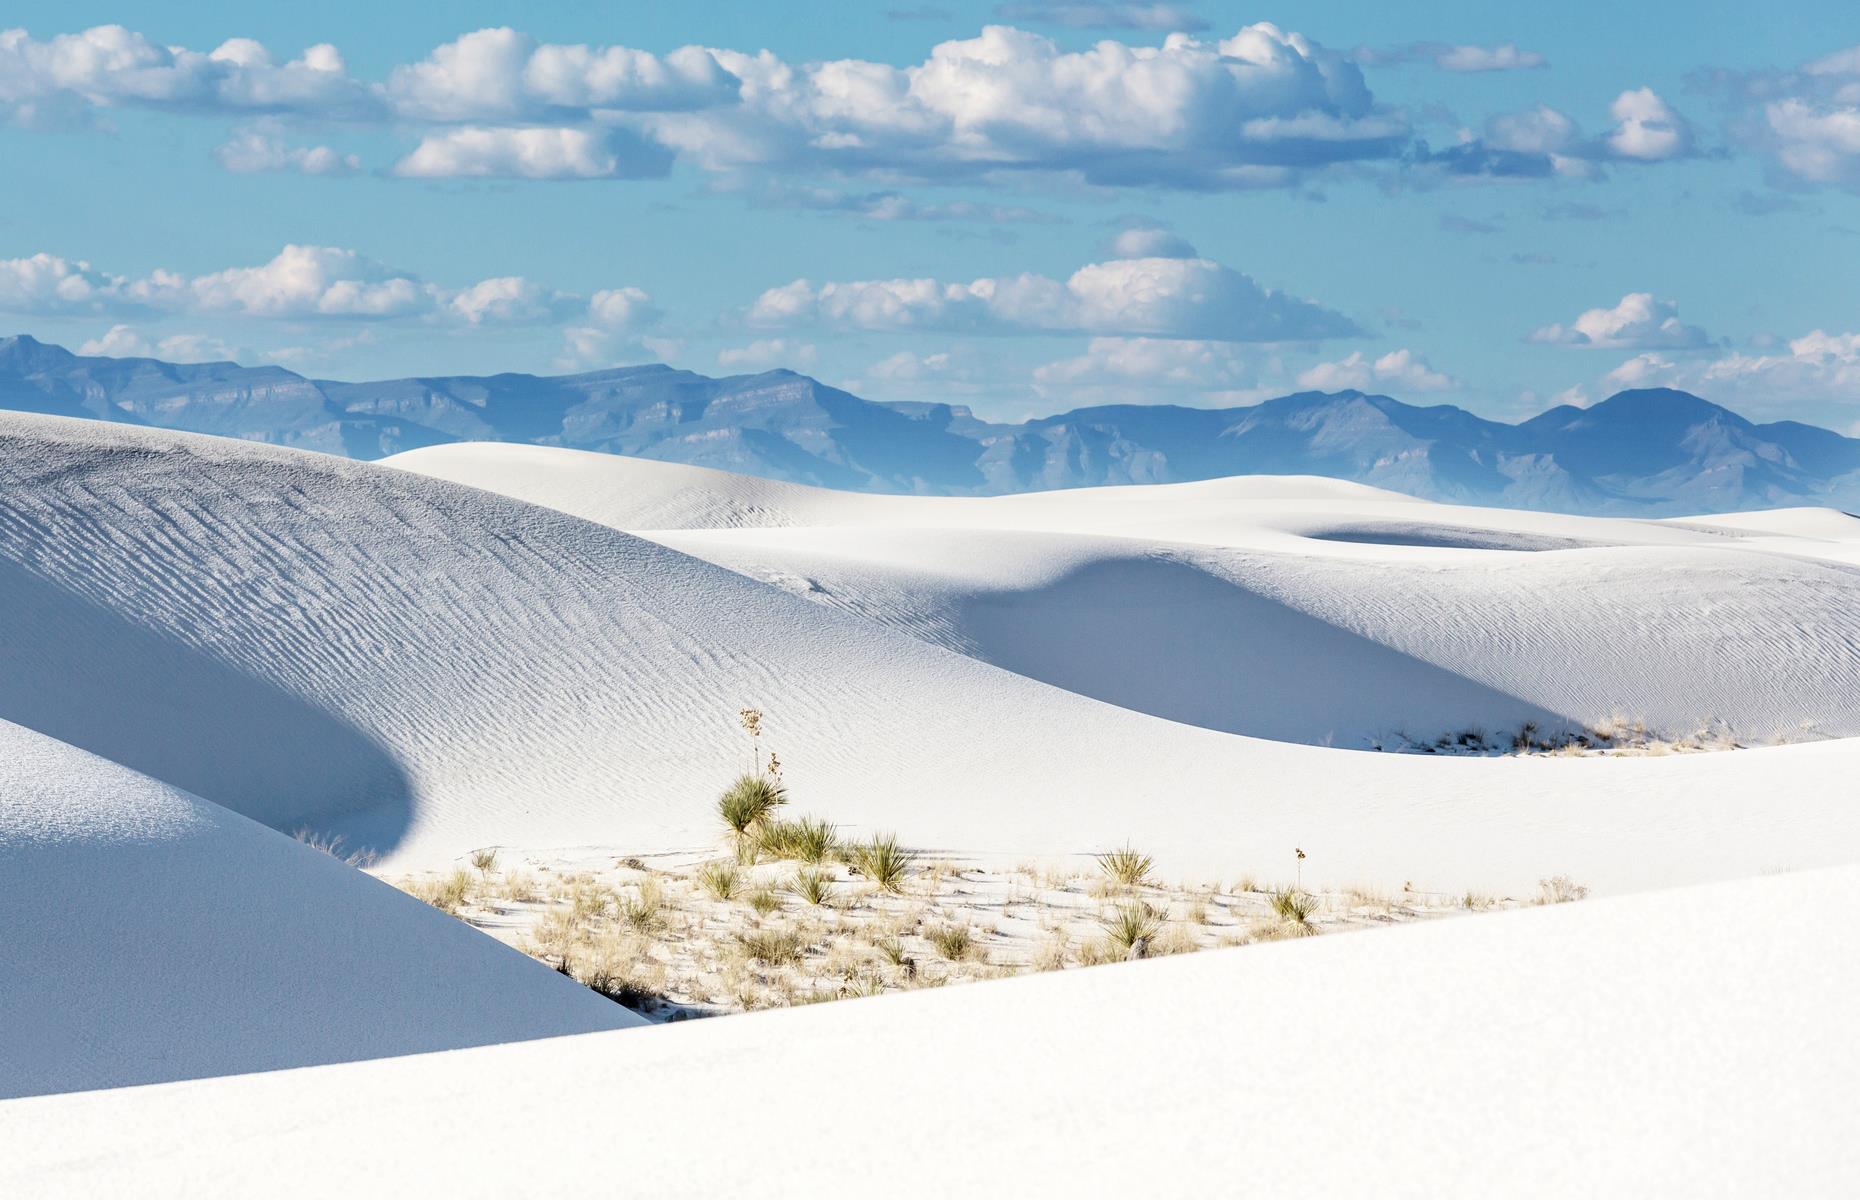 <p>This 275-square-mile (712sq km) desert in New Mexico's Tularosa Basin hardly looks as if it belongs on Earth, let alone in the USA. The dunes are made of gypsum sand, a rare mineral found in few places on the planet. Since gypsum sand (unlike regular sand) dissolves in water, it's a miracle to find it in such vast quantities – but this swathe of New Mexico has a climate dry enough to allow the grains to thrive. A ranger-led stroll at sunset is one of best ways to take in this most unique of landscapes but <a href="https://www.nps.gov/whsa/planyourvisit/conditions.htm">check the website</a> for the latest availability. </p>